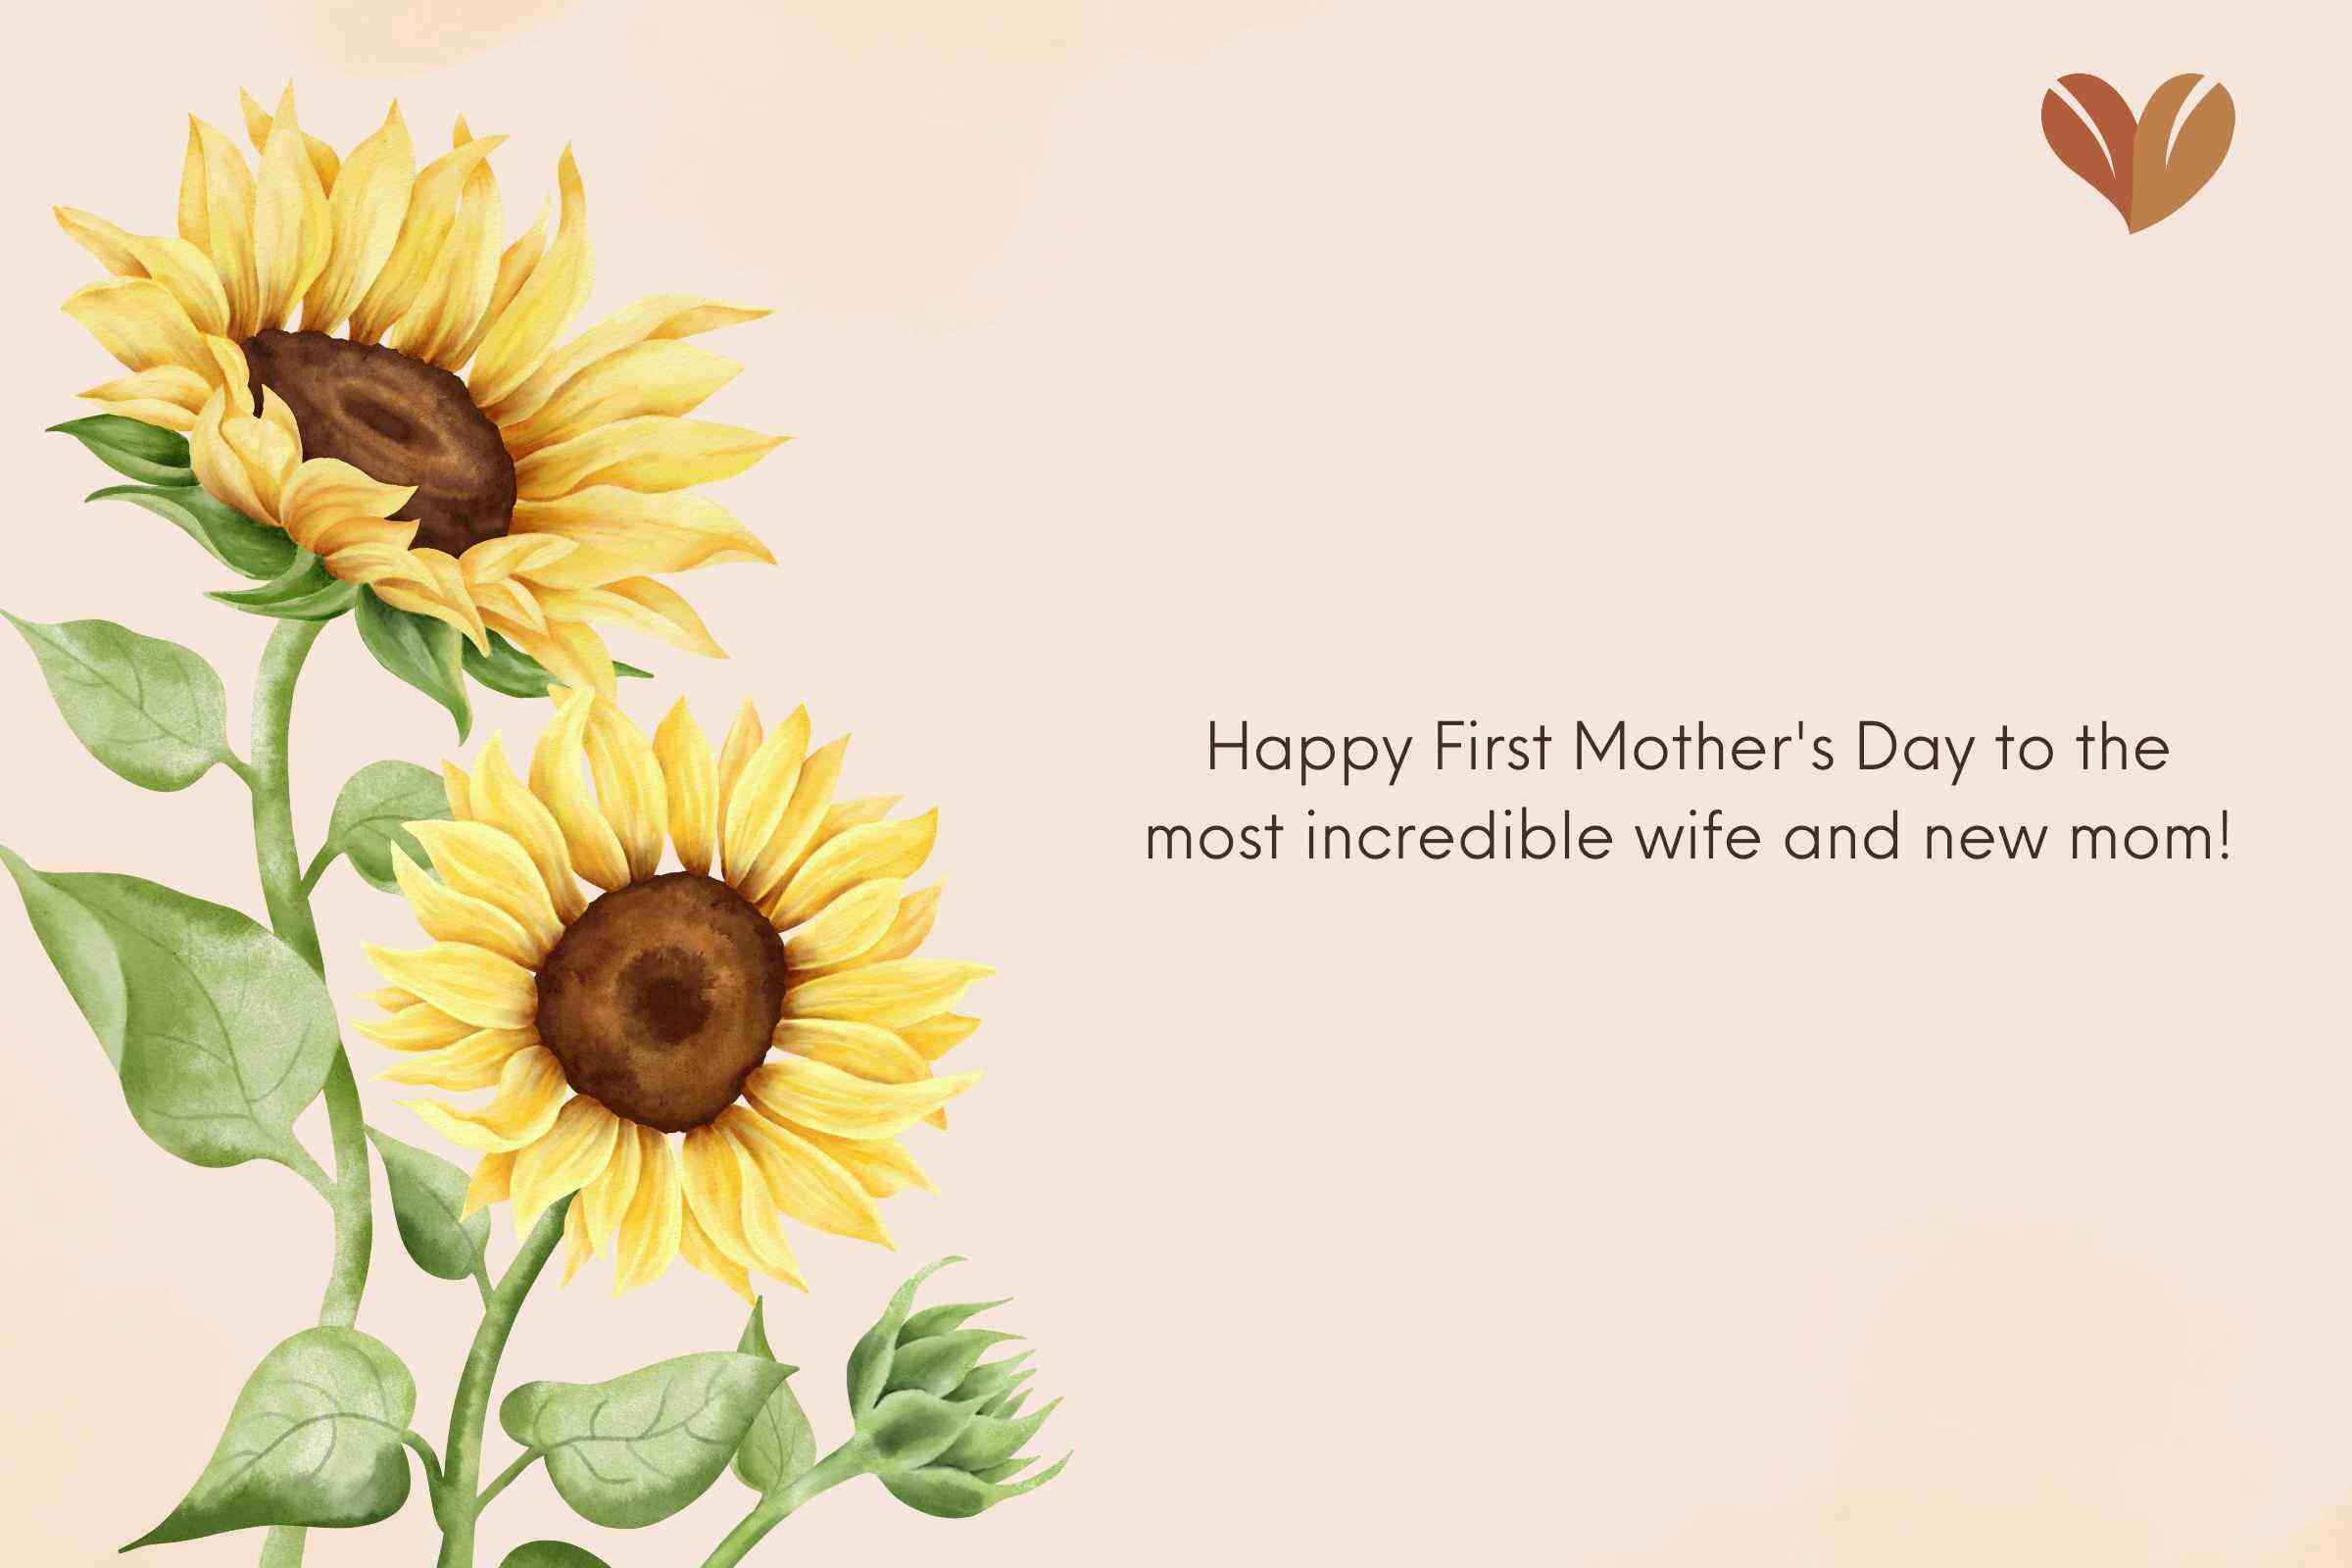 Sweet Mother's Day sayings from husband to wife